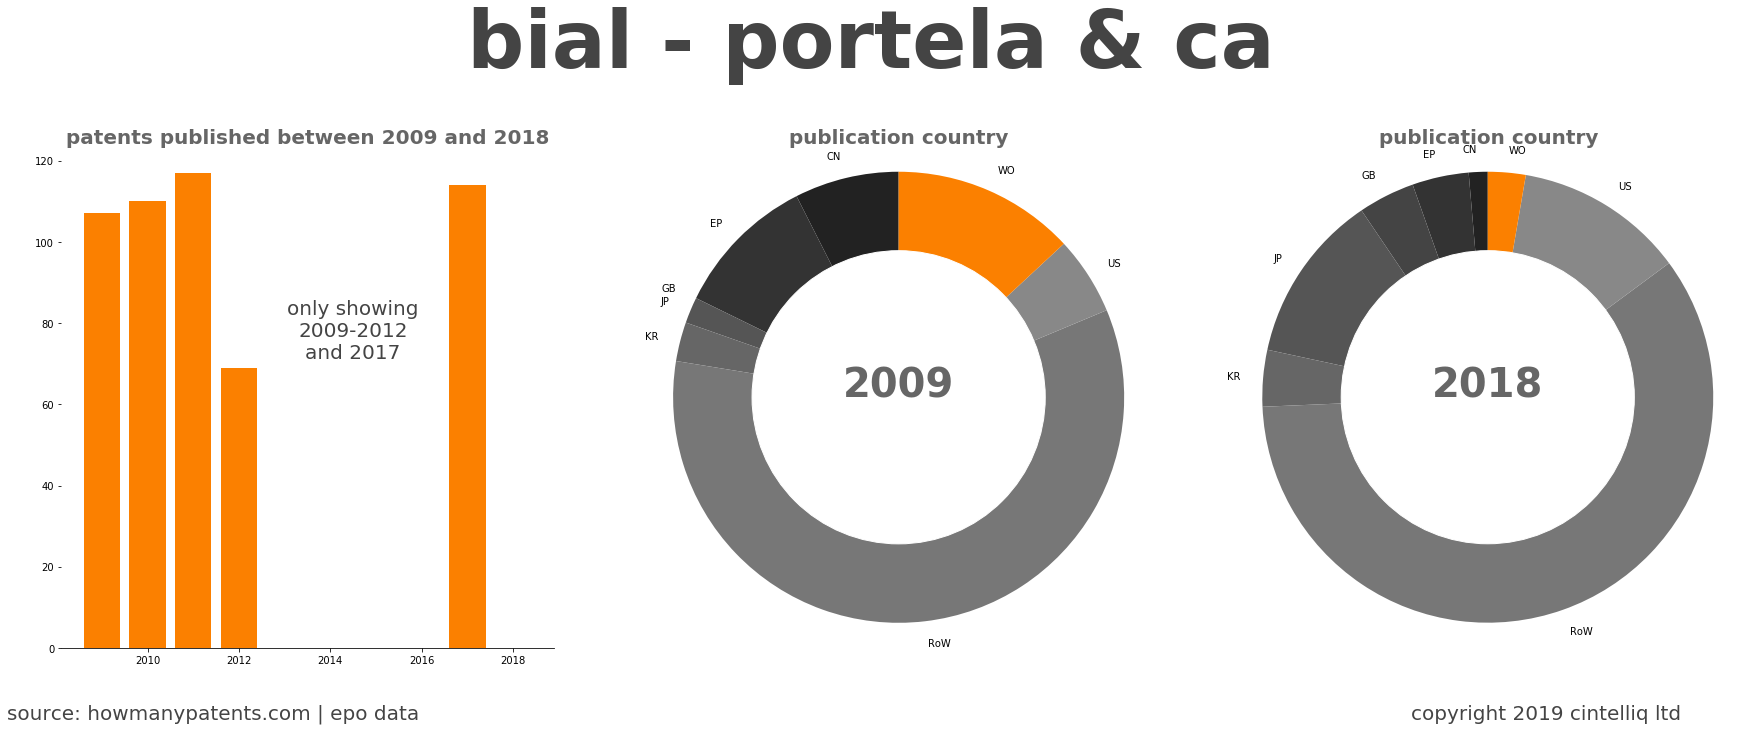 summary of patents for Bial - Portela & Ca